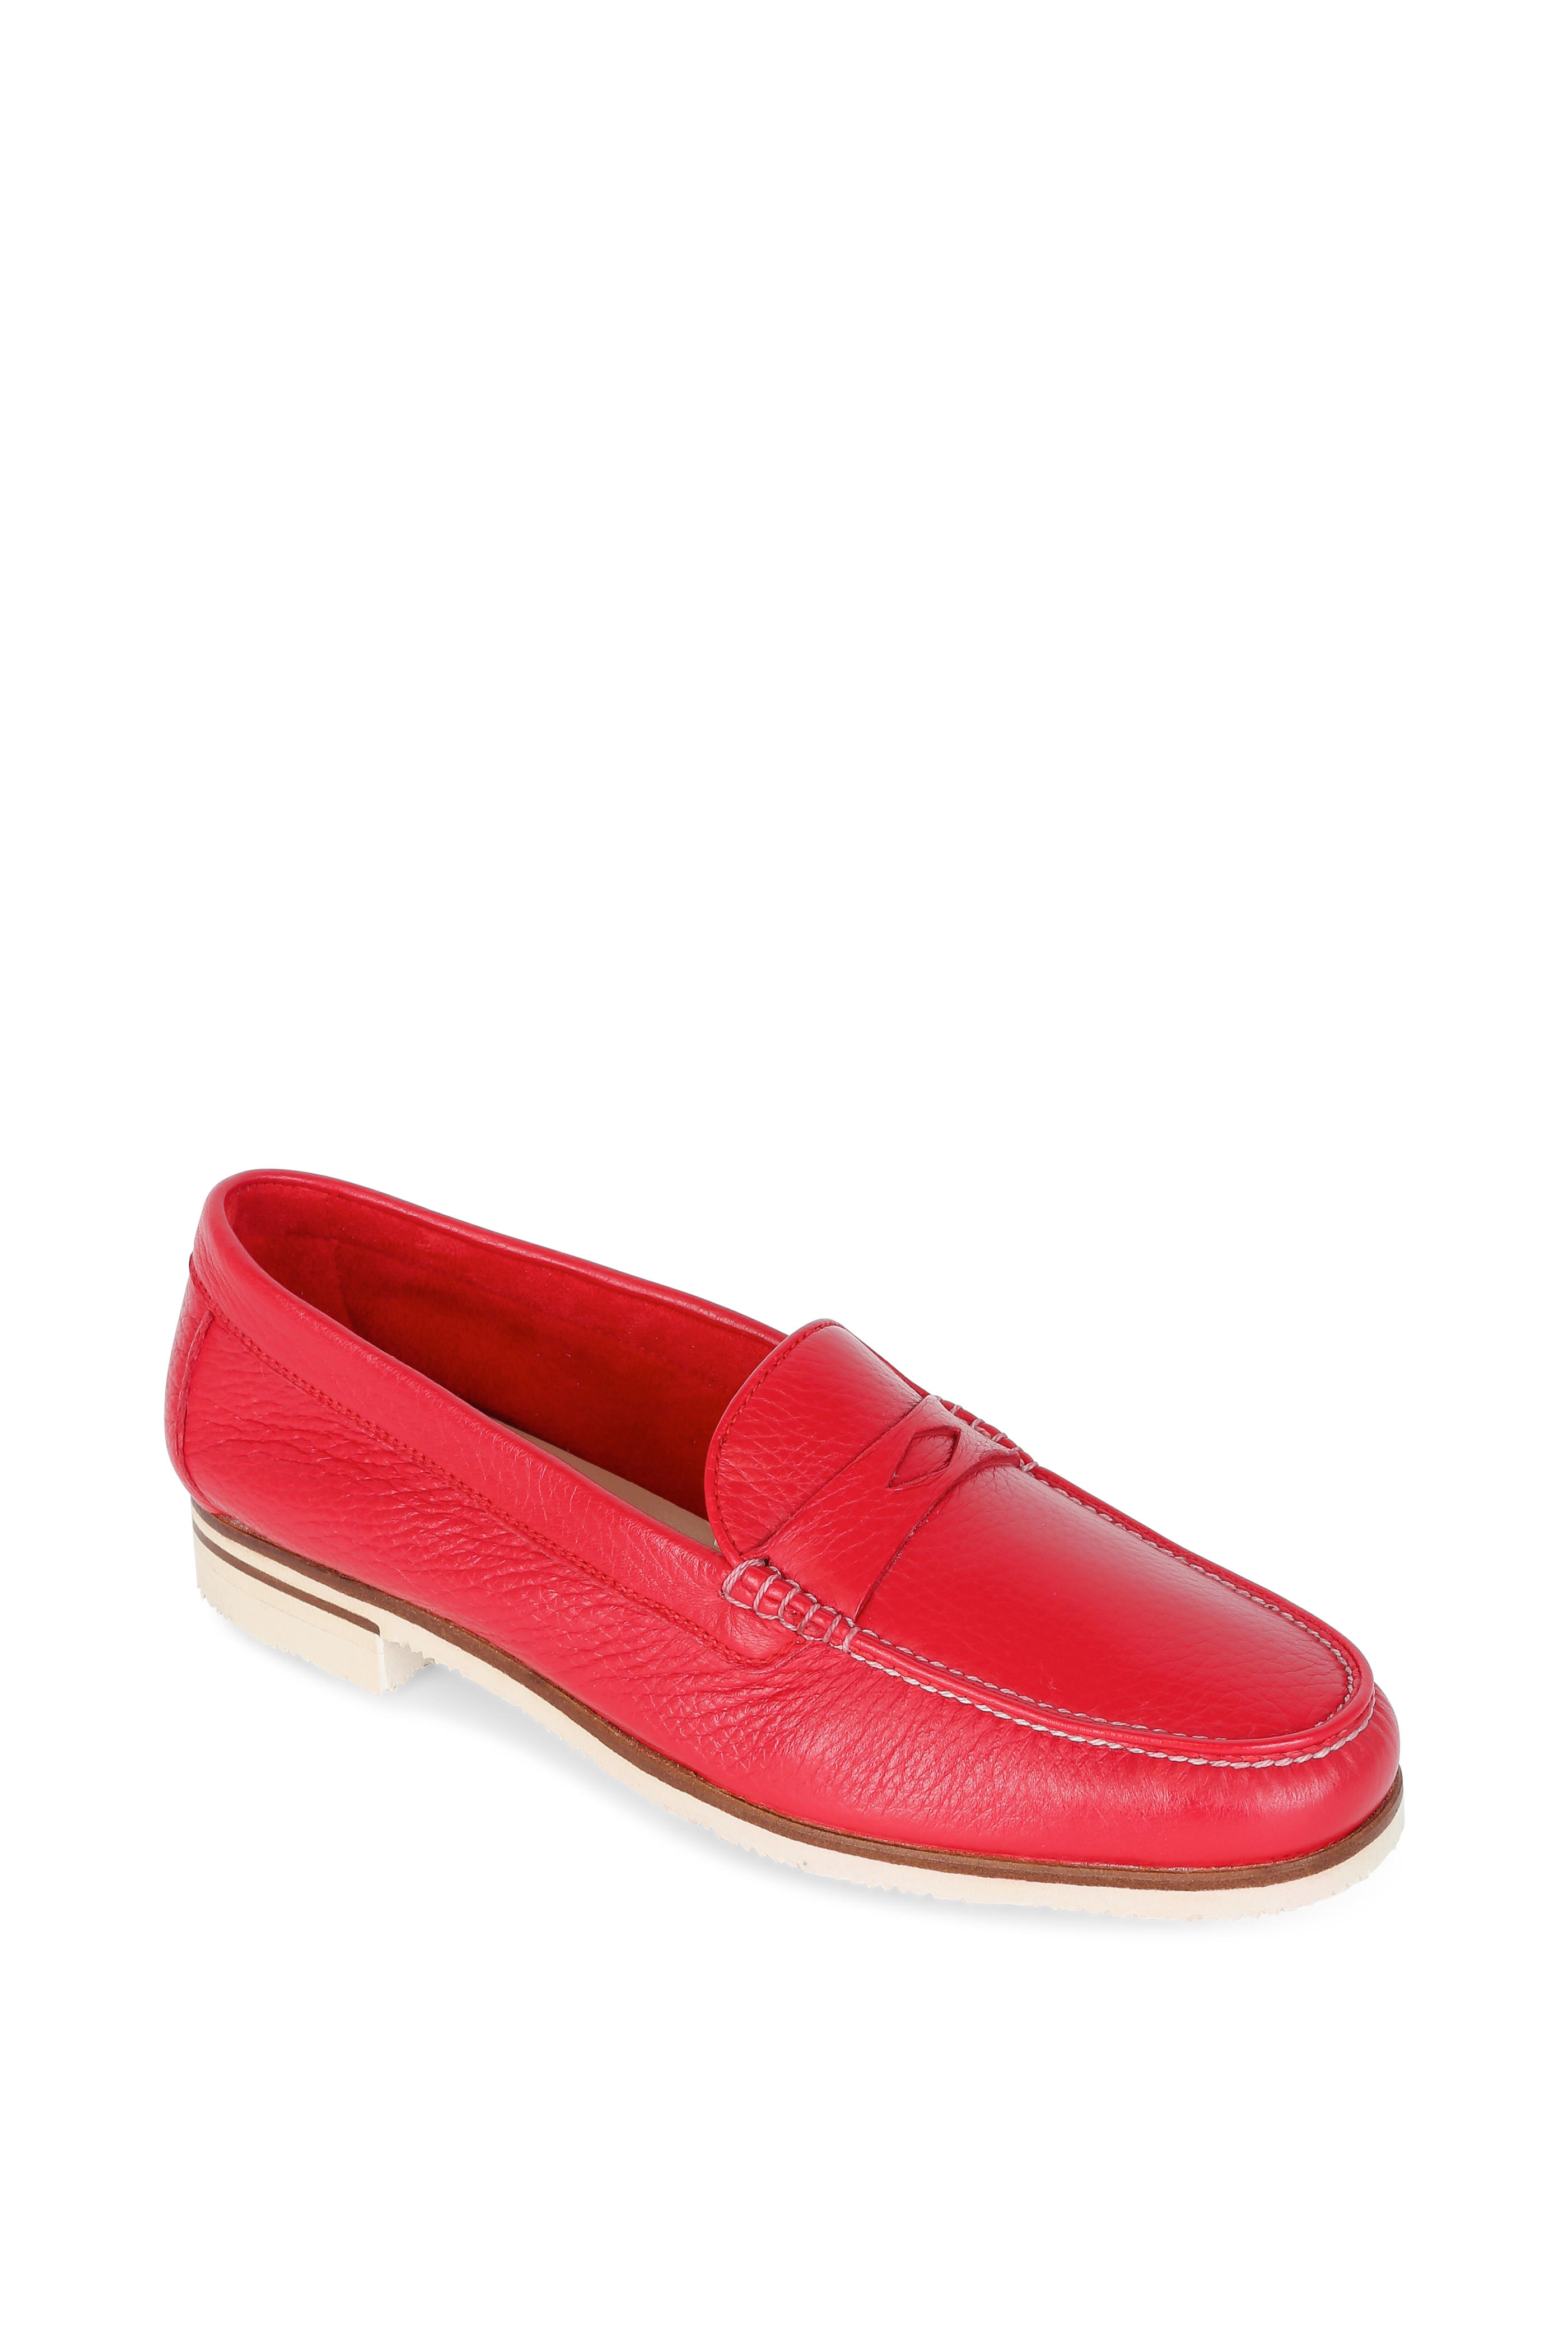 red penny loafers